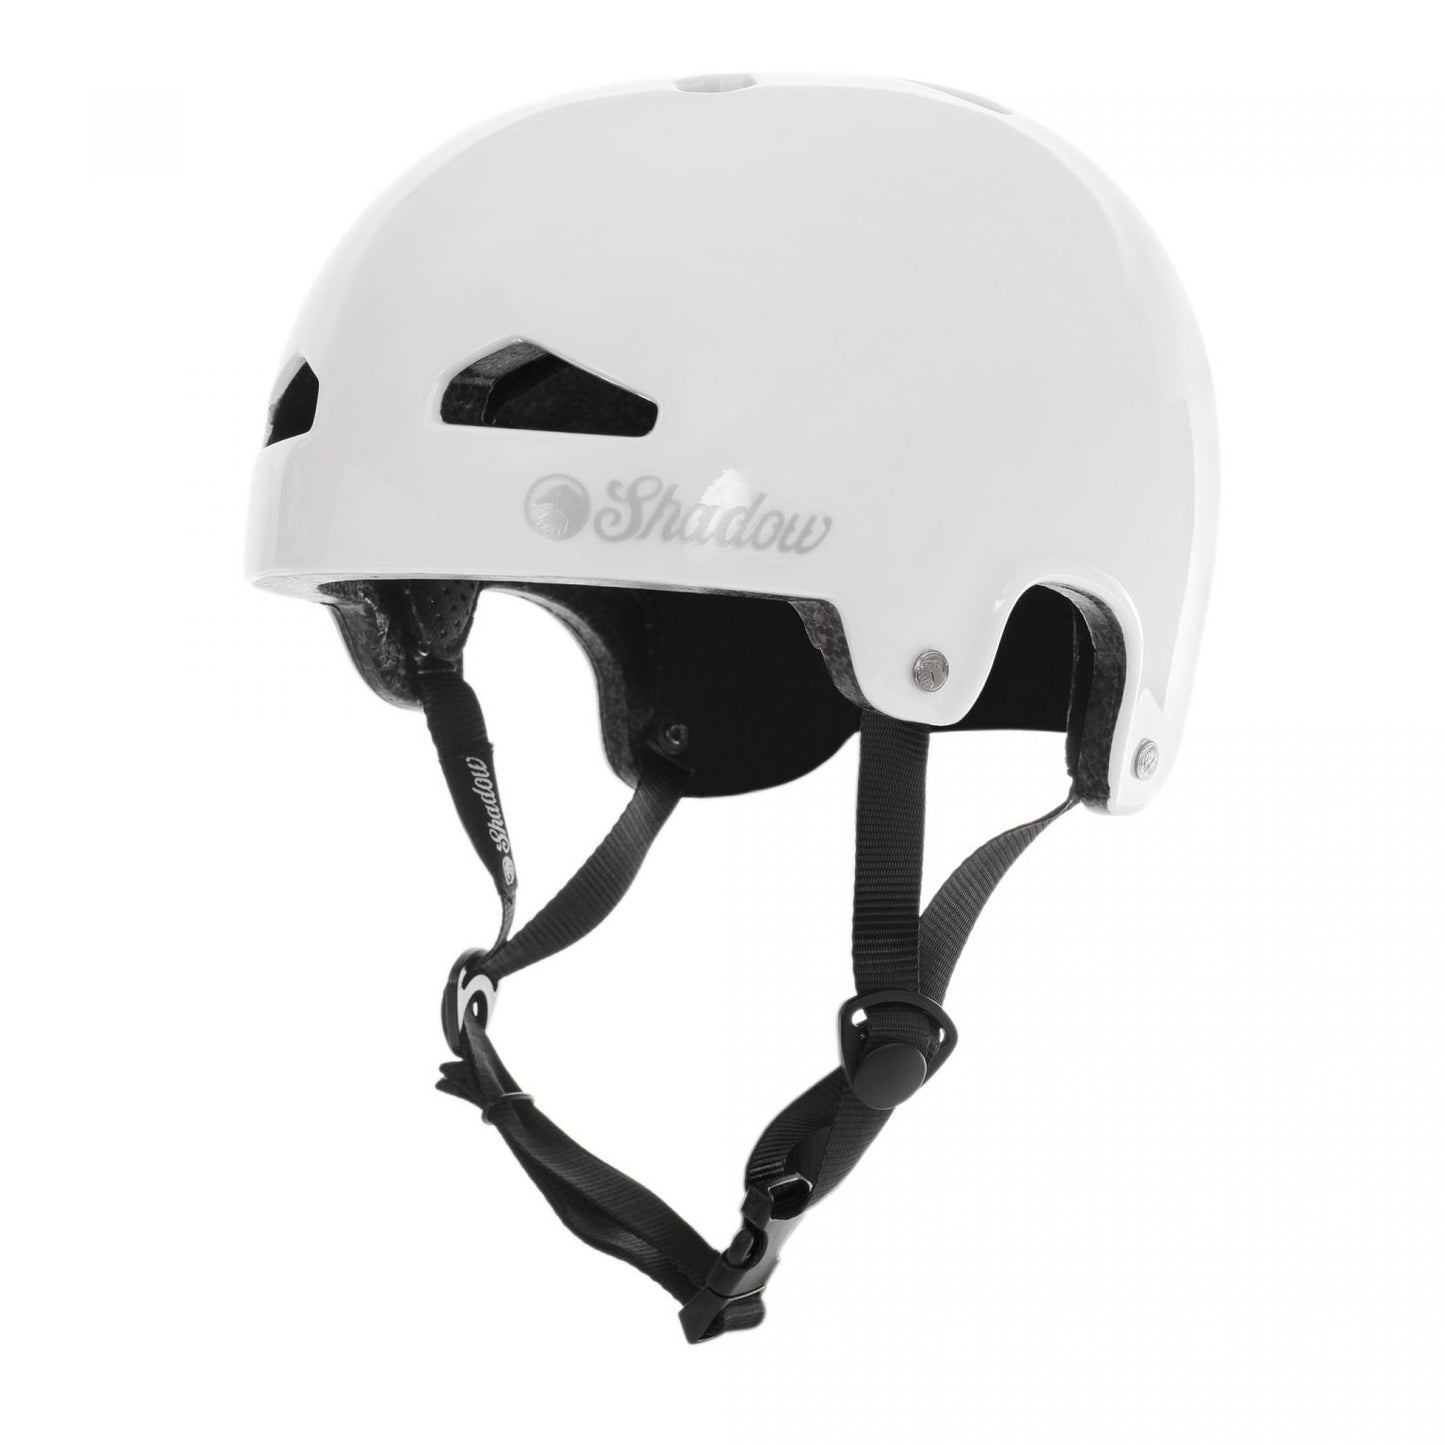 Helmet - The Shadow Consiparcy In-Mold Featherweight